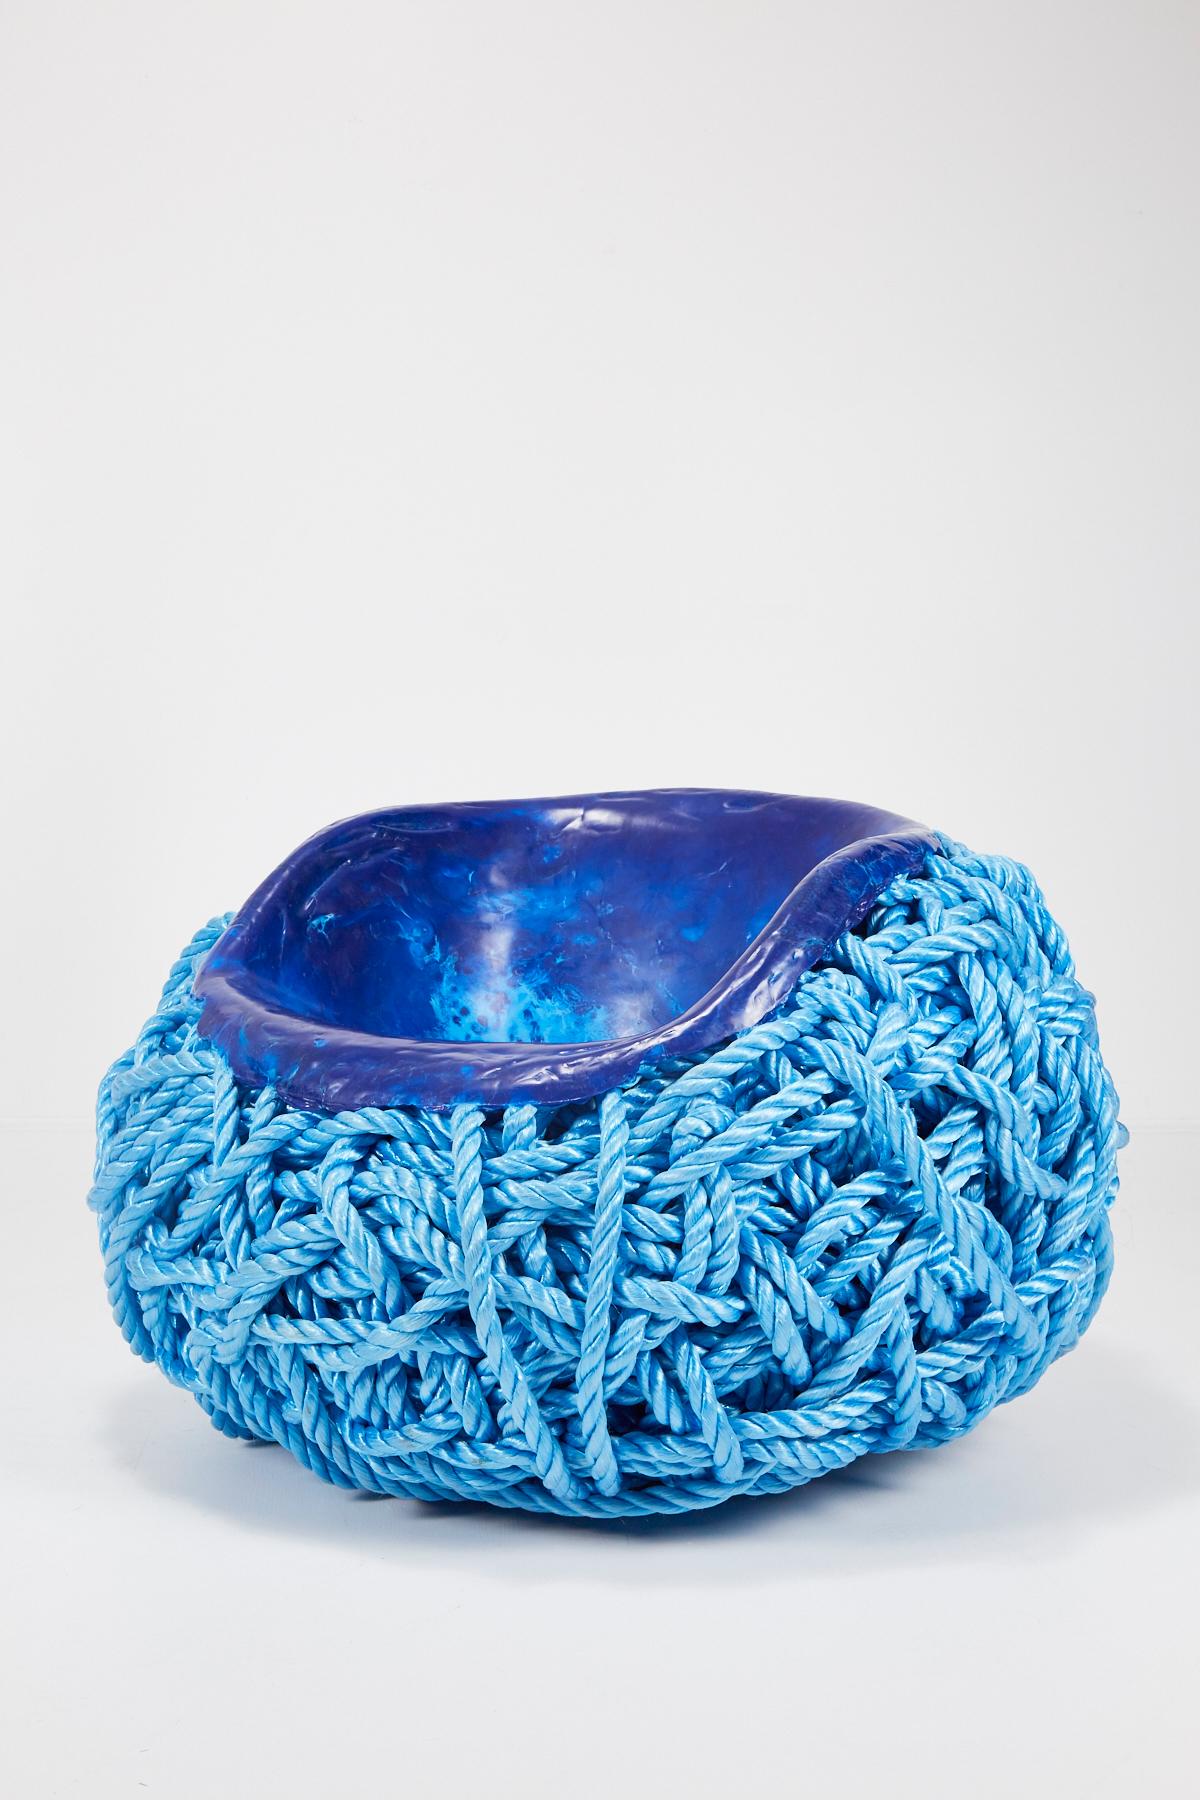 Meltdown Chair PP Rope Blue Chair by Tom Price, 2017 For Sale 1